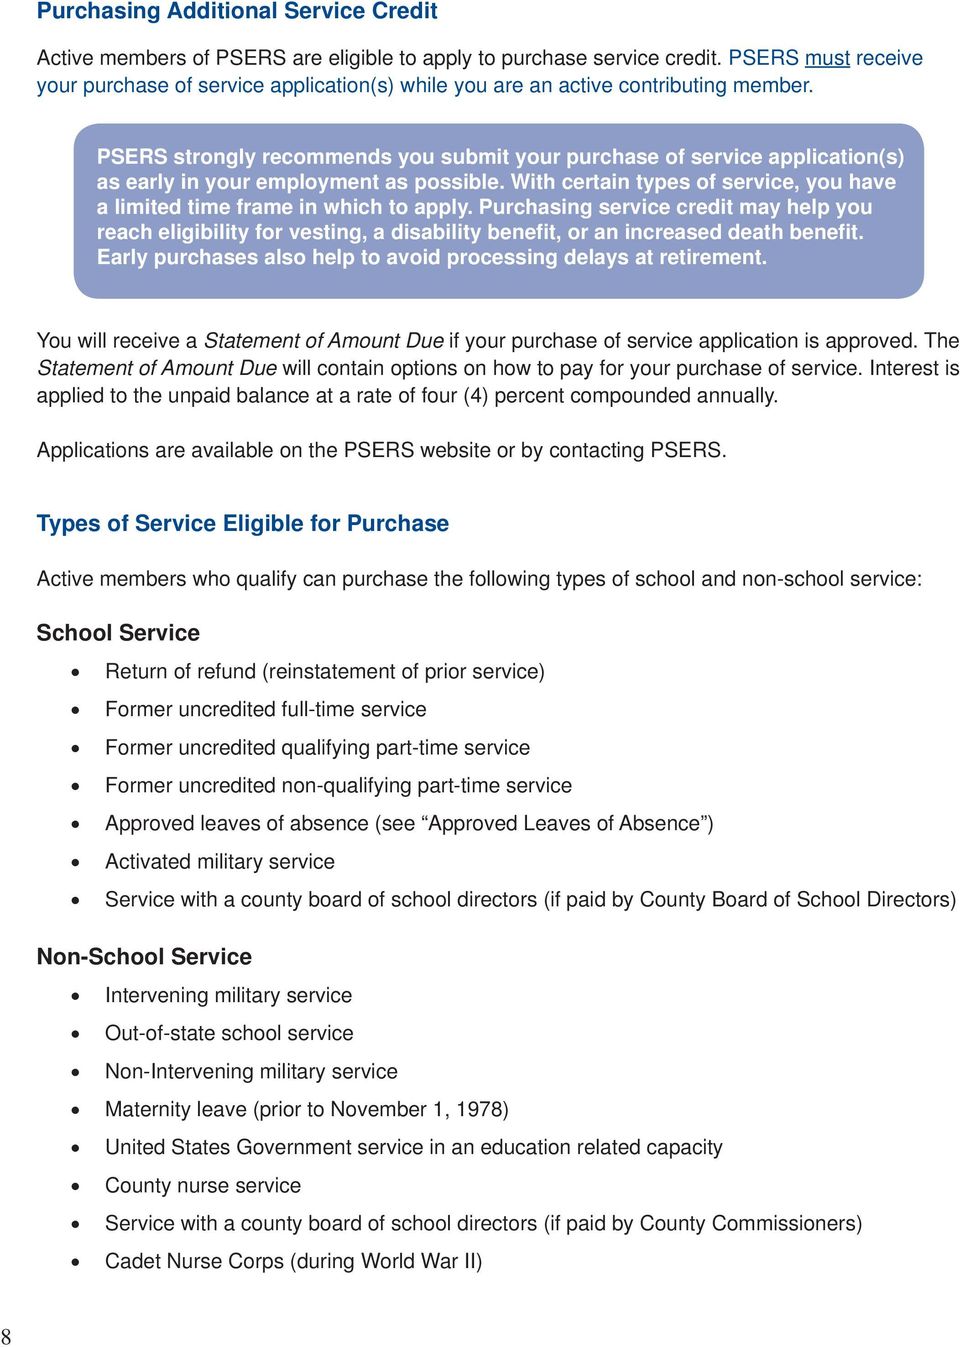 PSERS strongly recommends you submit your purchase of service application(s) as early in your employment as possible. With certain types of service, you have a limited time frame in which to apply.